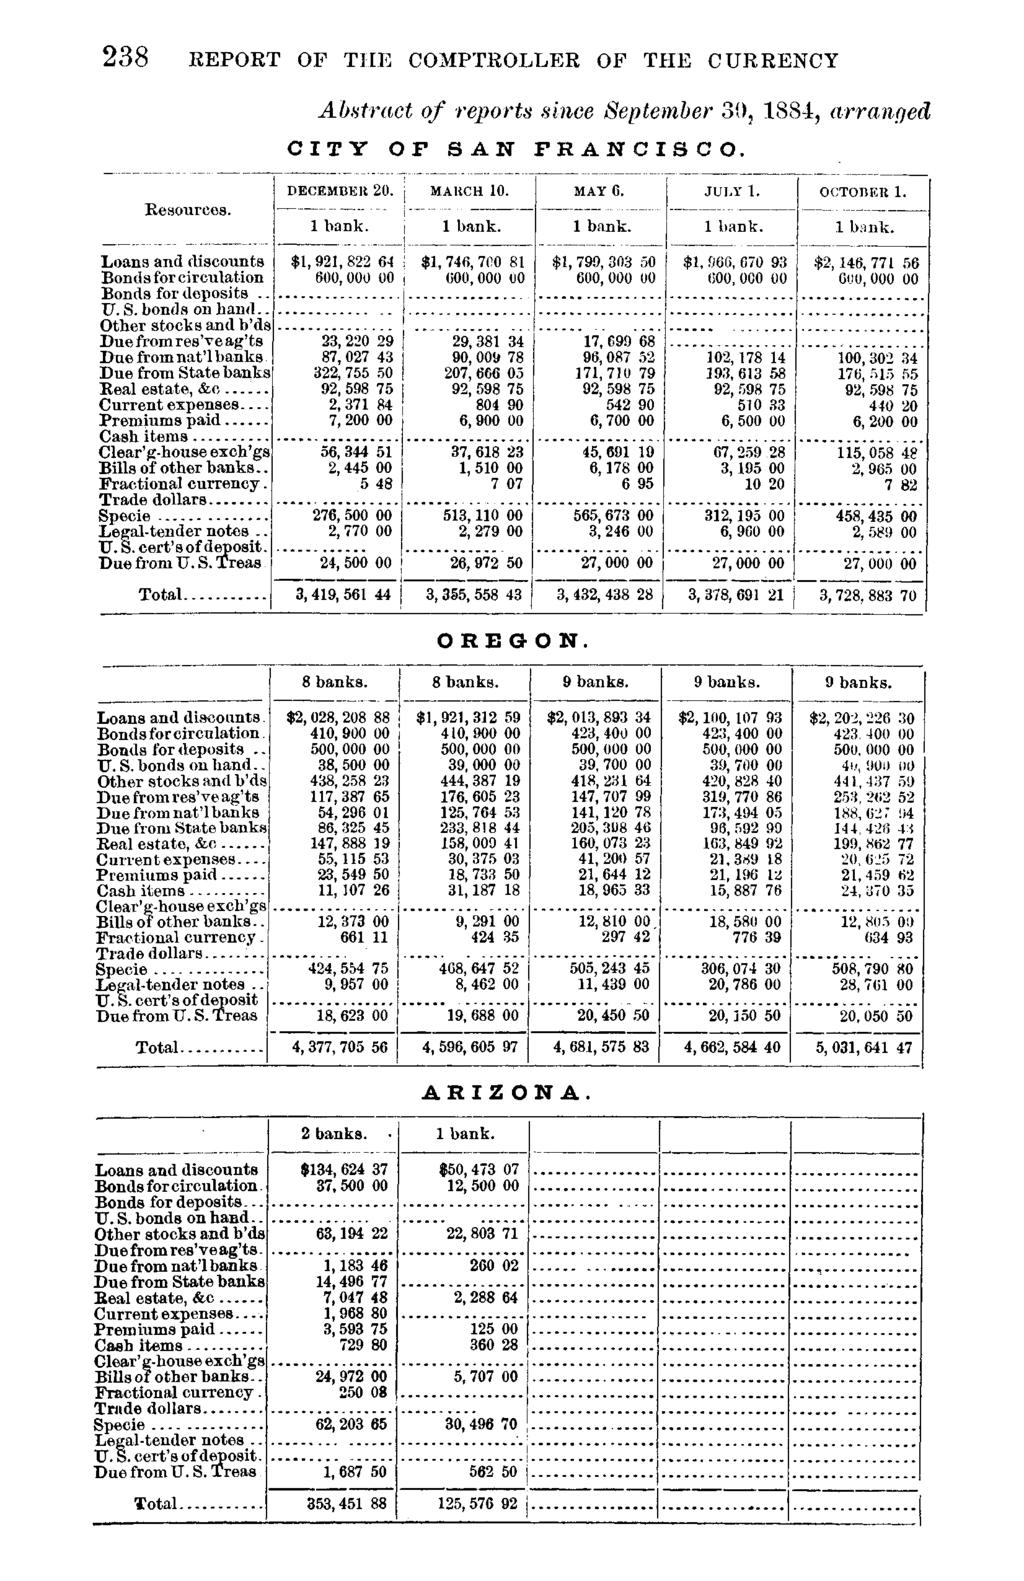 238 REPORT OF THE COMPTROLLER OF THE CURRENCY Abstract of reports since September 30, 1884, arranged CITY OF SAN FRANCISCO. Resources. DECEMBER 20. MARCH 10. 1 bank. 1 bank. MAY 6. 1 bank. JULY 1.